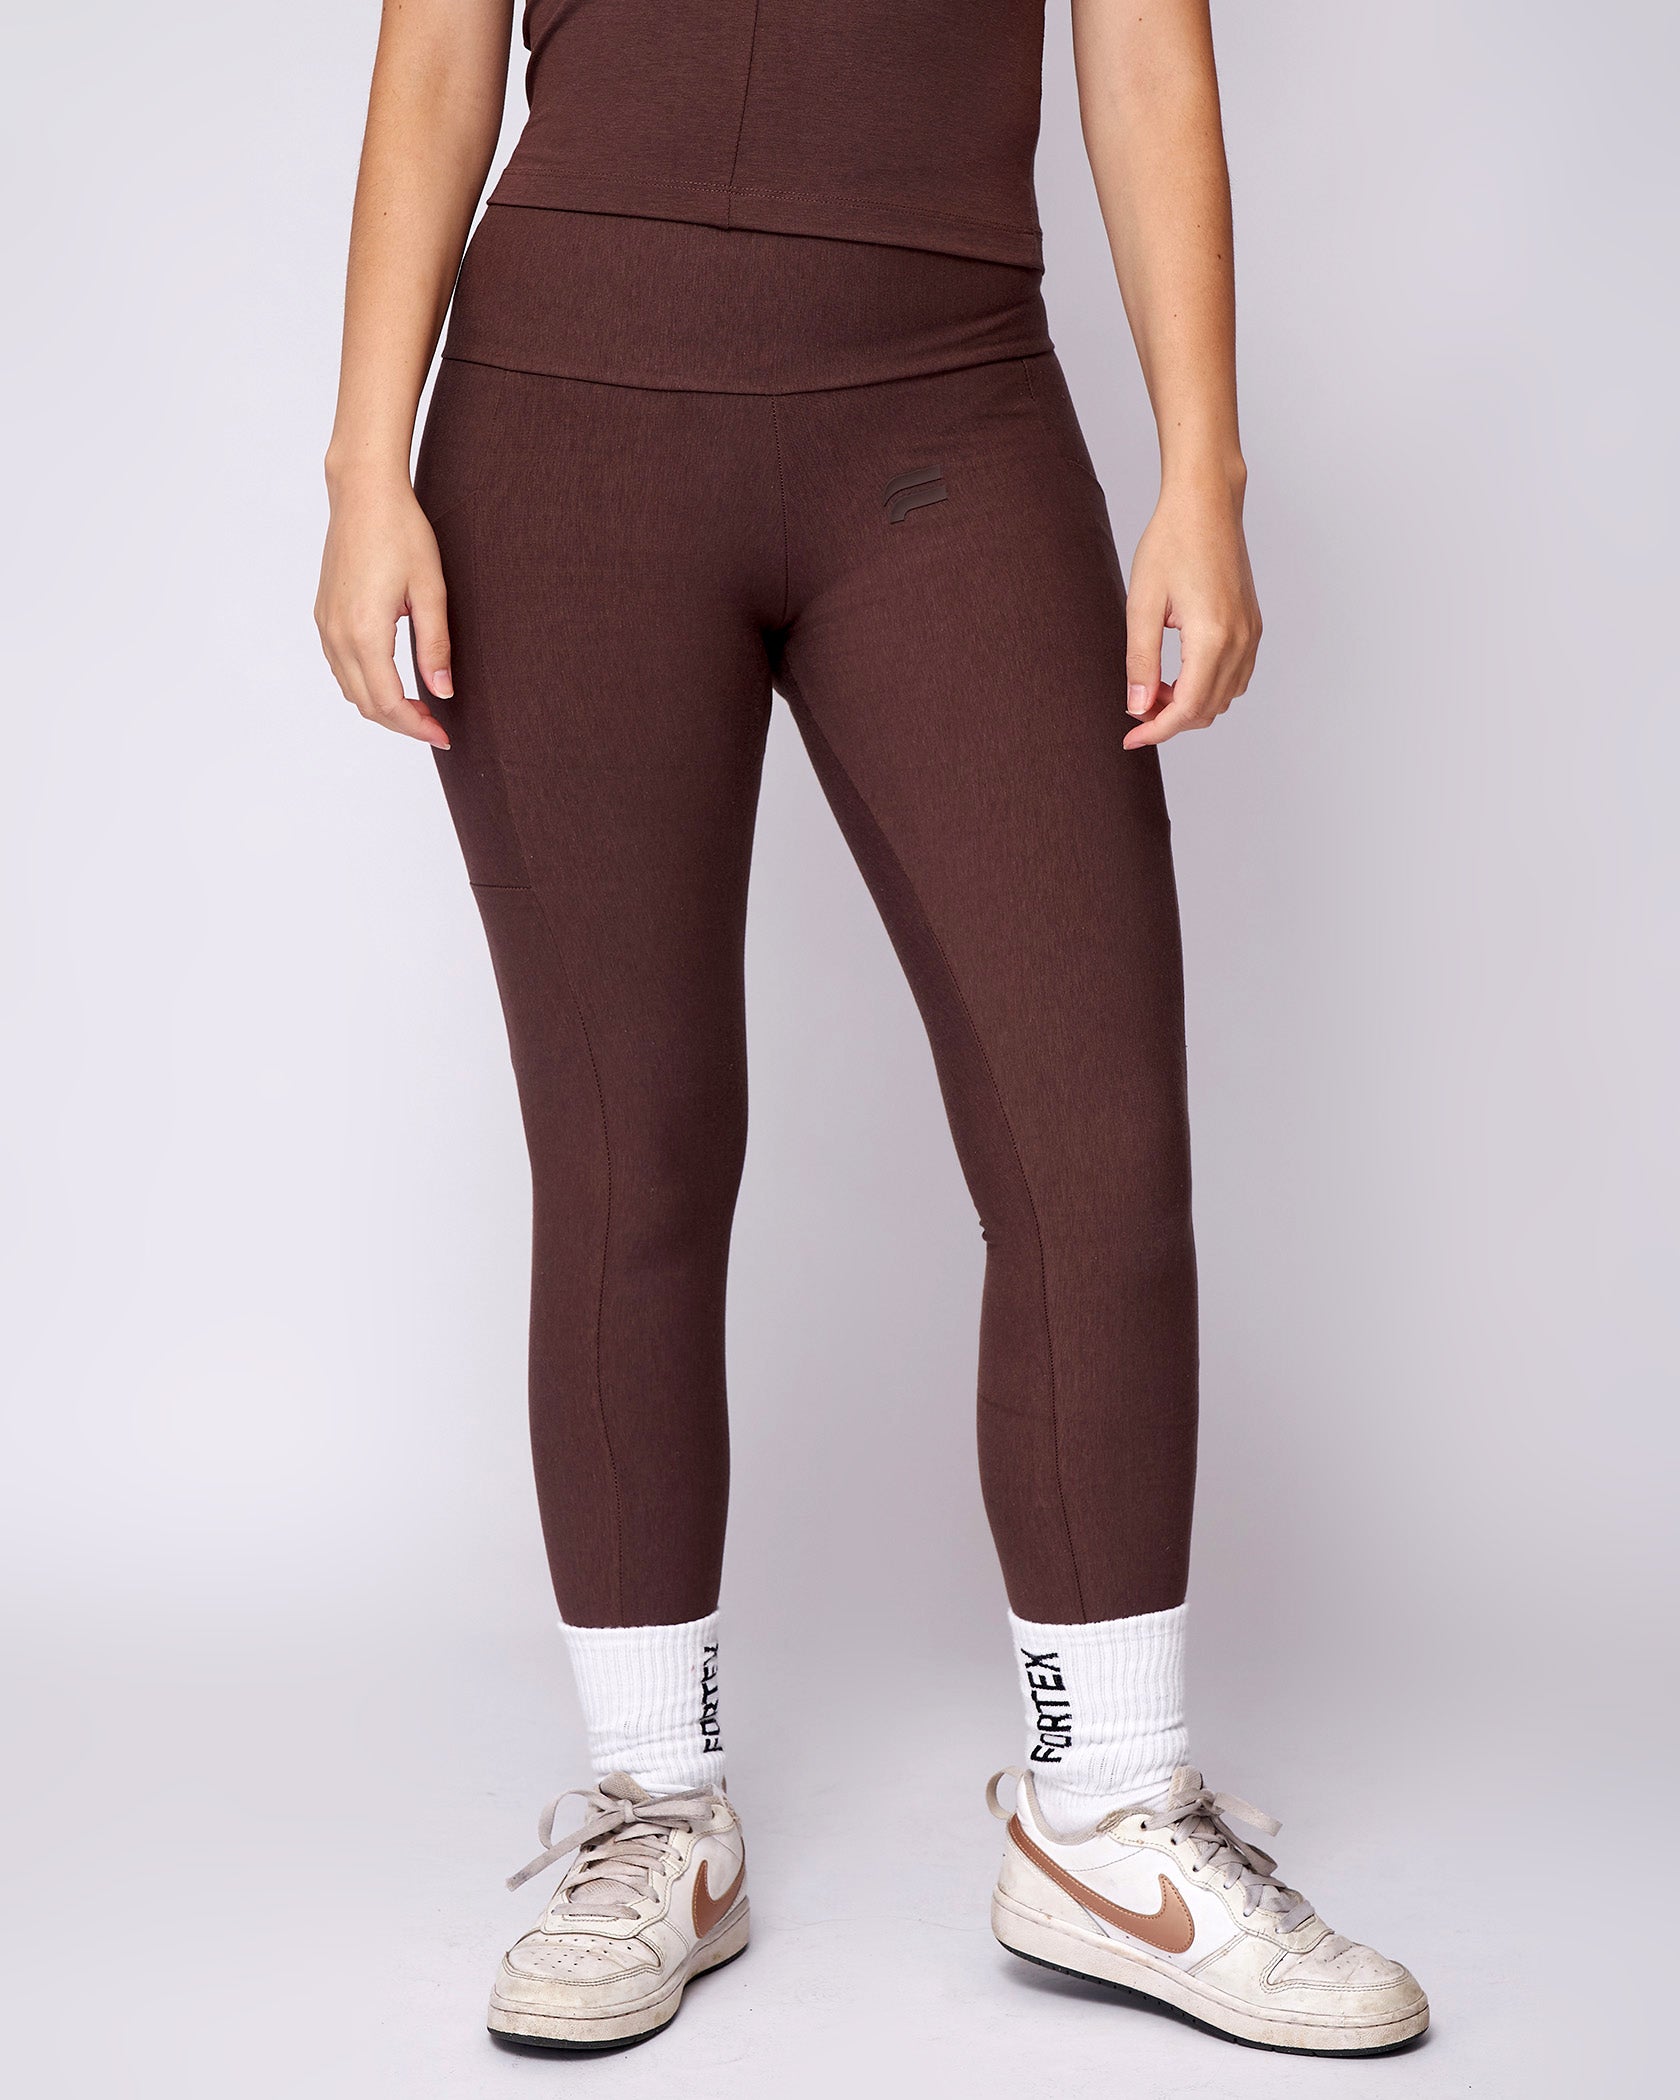 The FIX - Leggings are essential! Right? #musthaves 👌👌